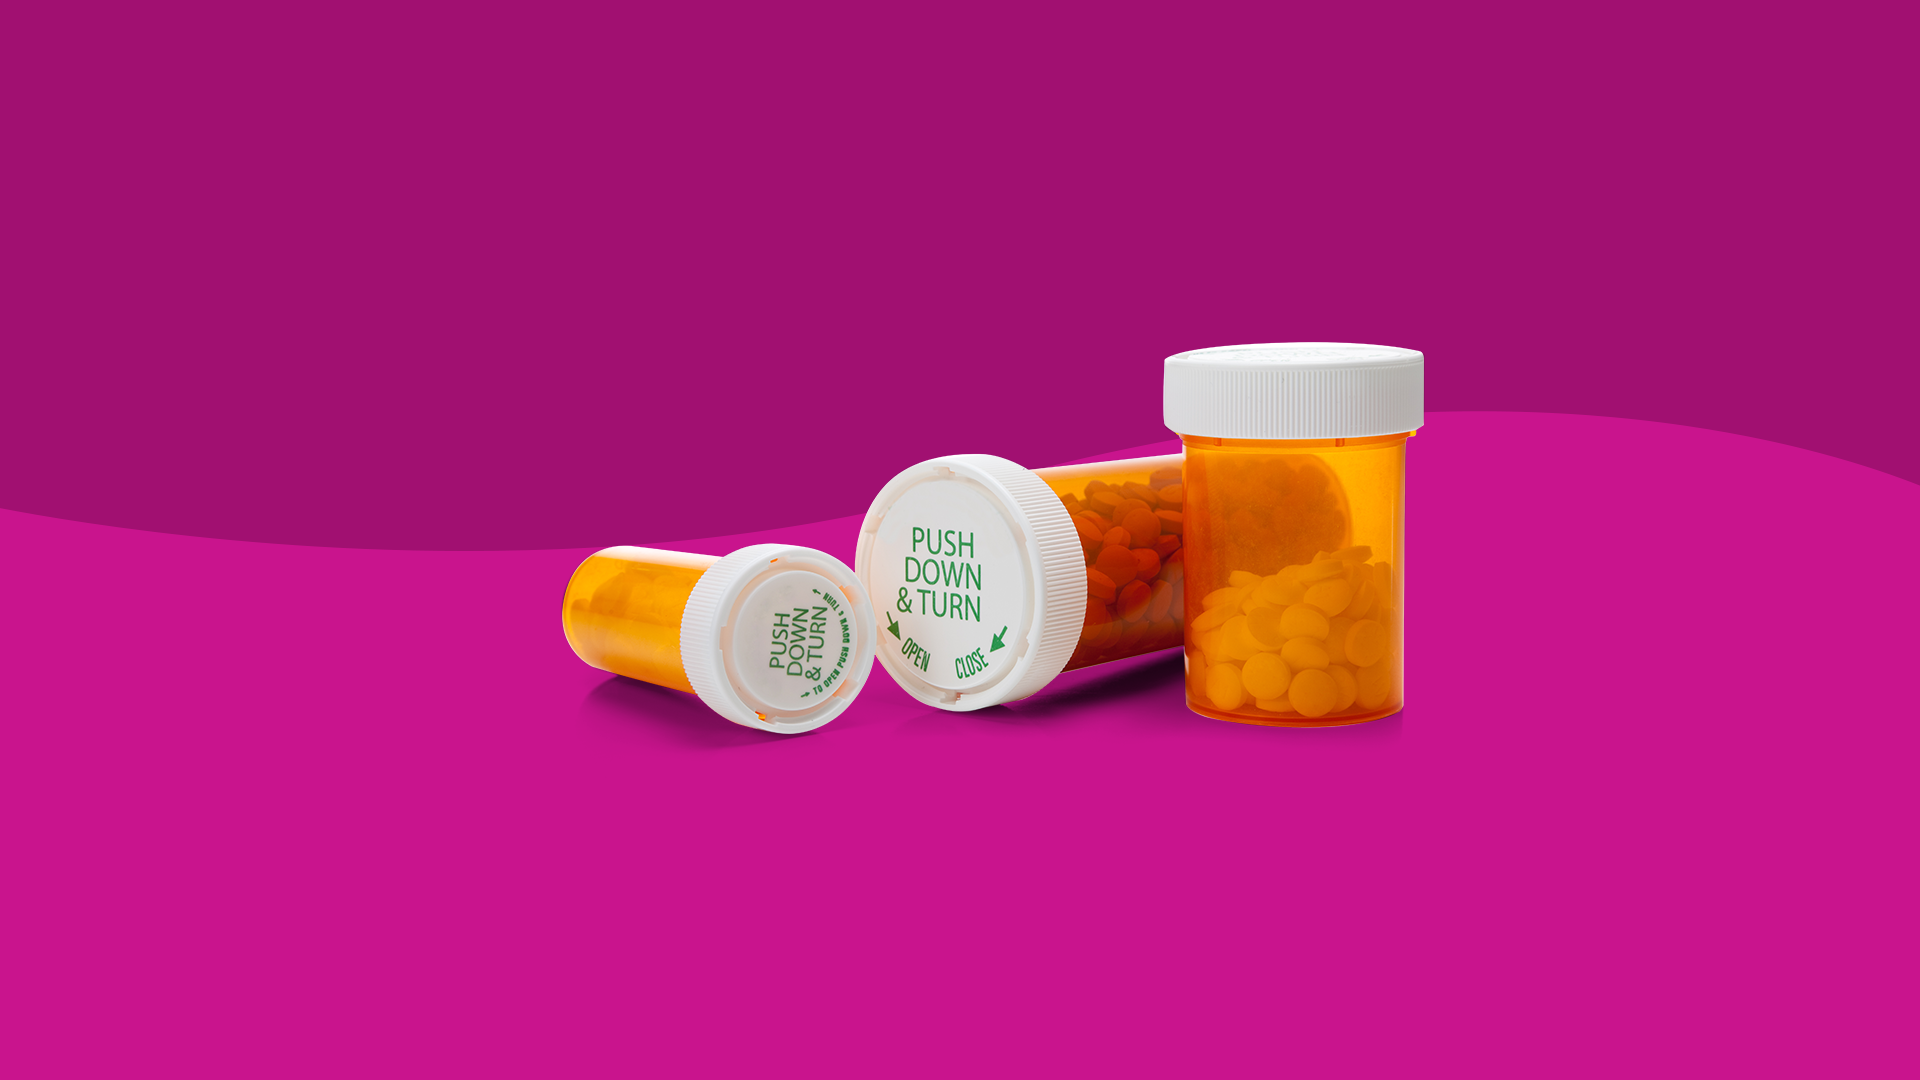 Rx pill bottles: What can I take instead of Trintellix?